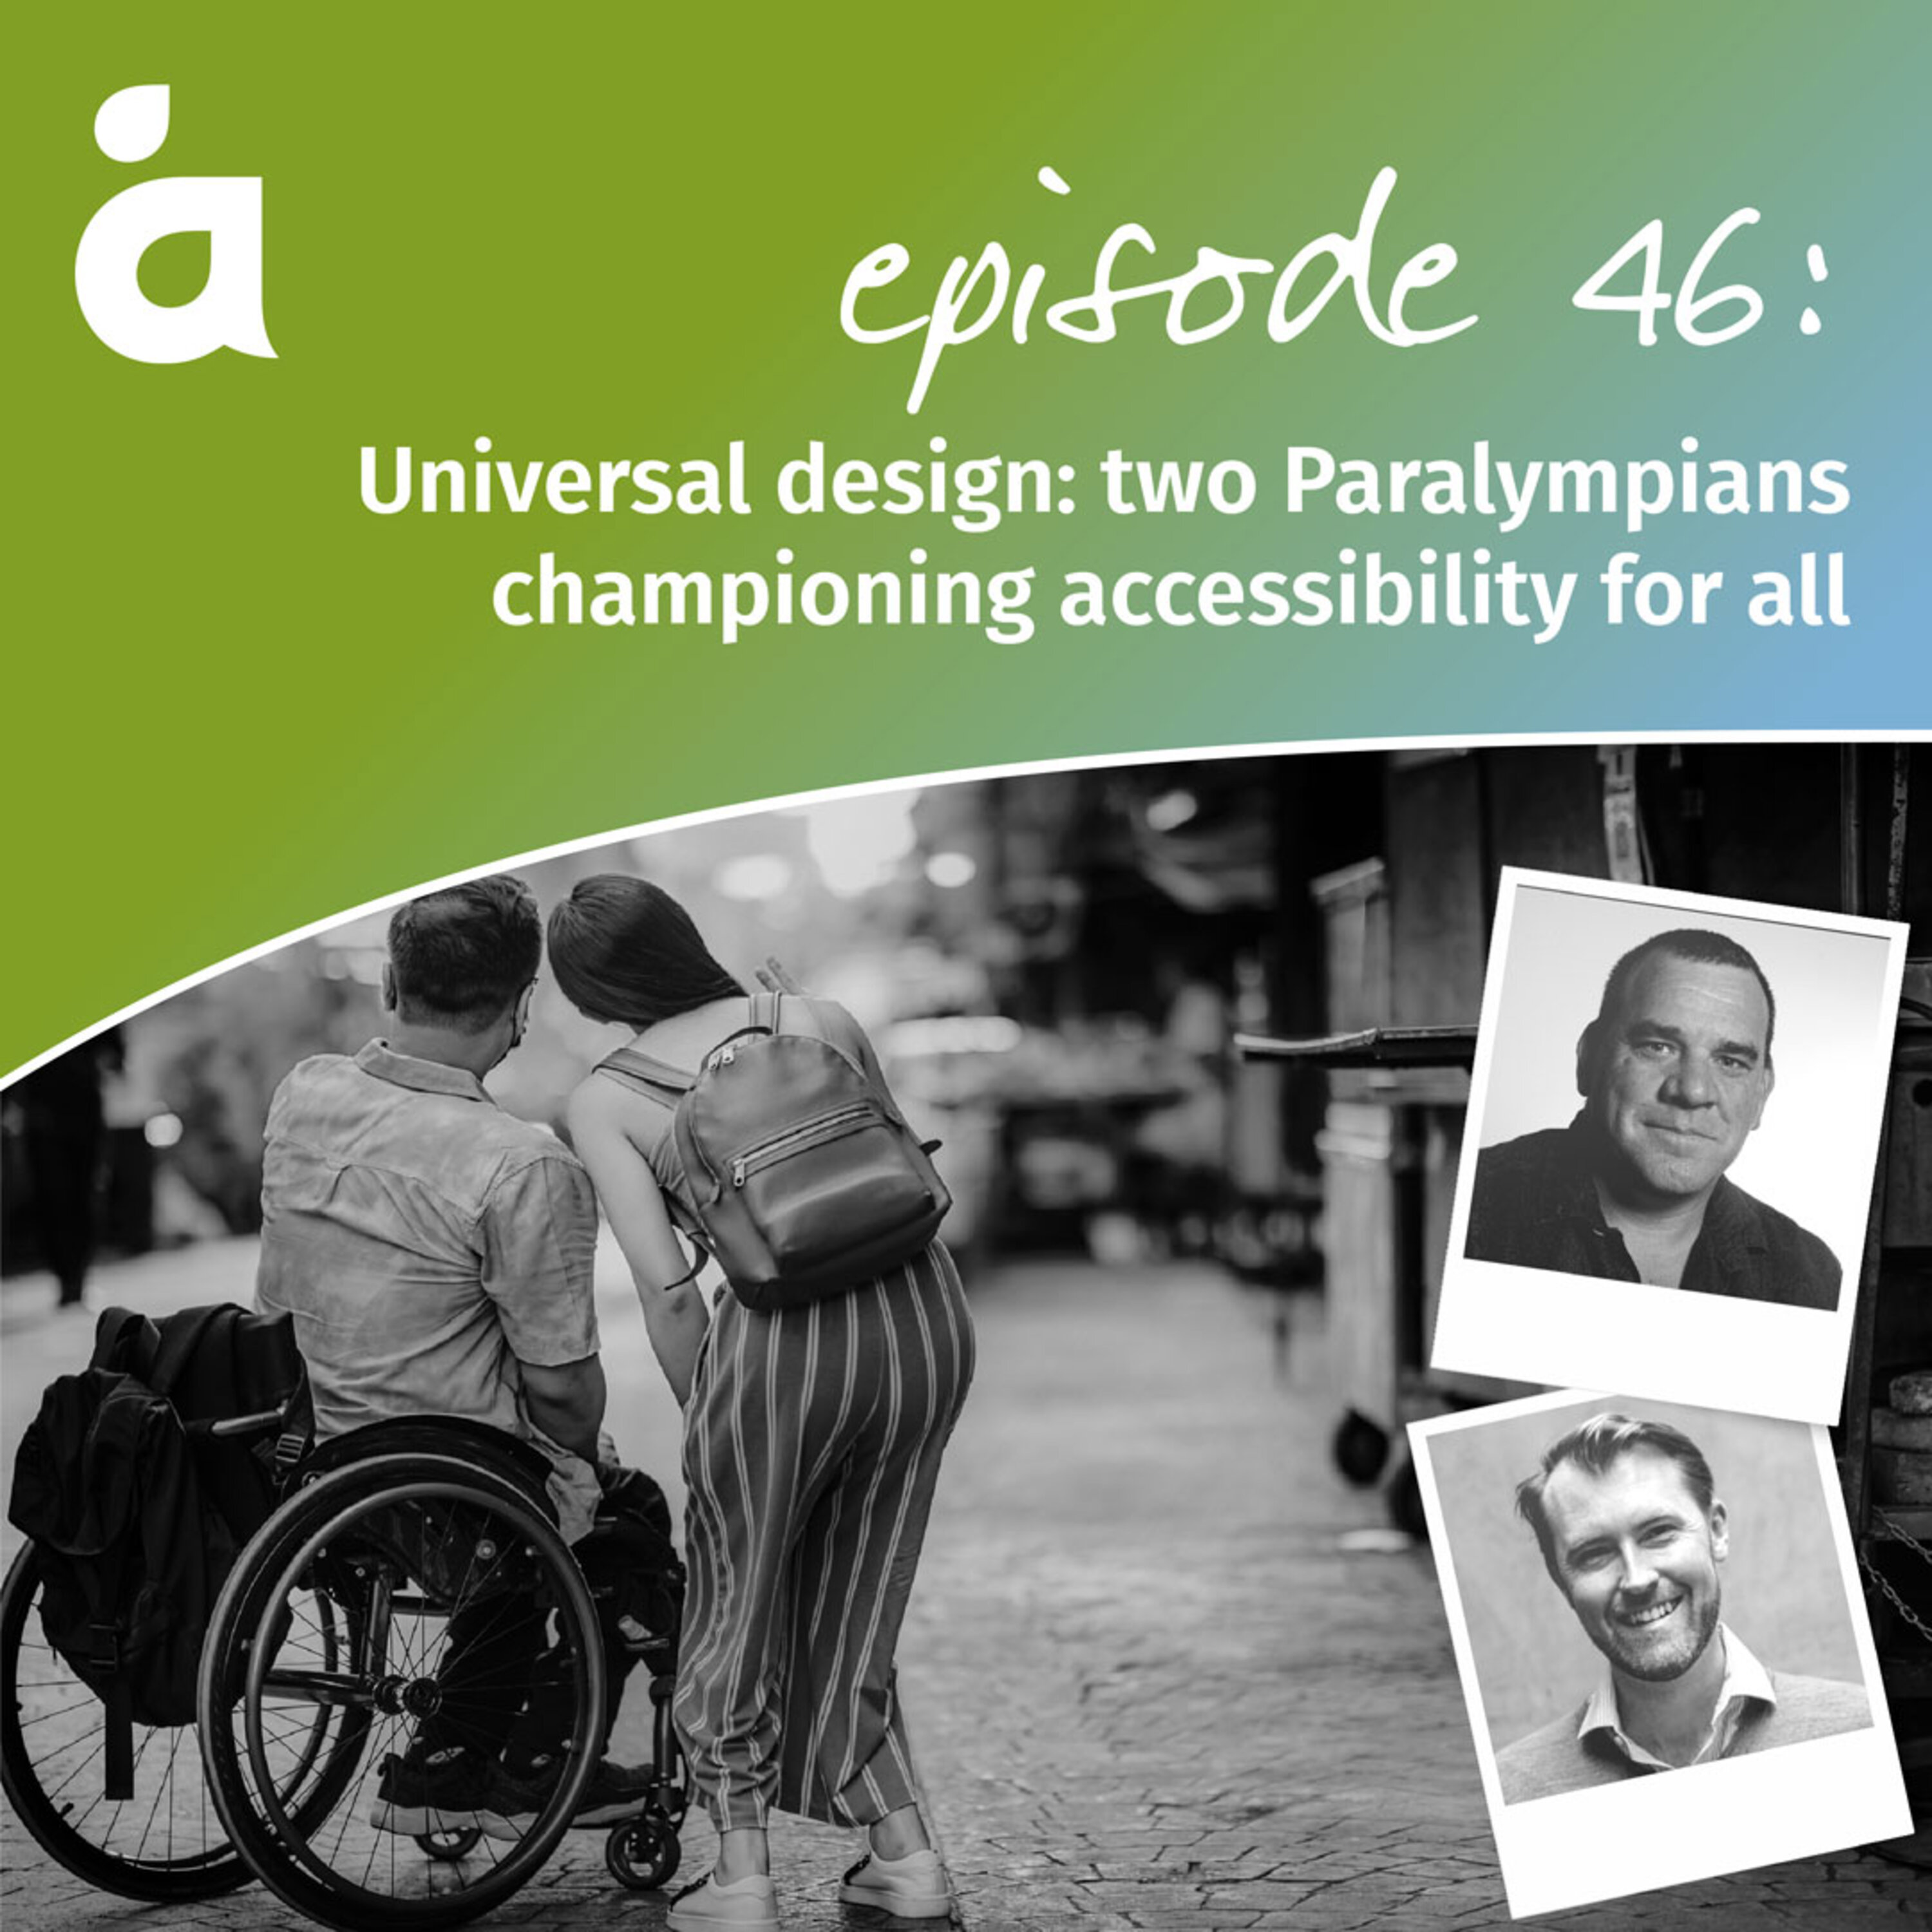 Universal design: two Paralympians championing accessibility for all